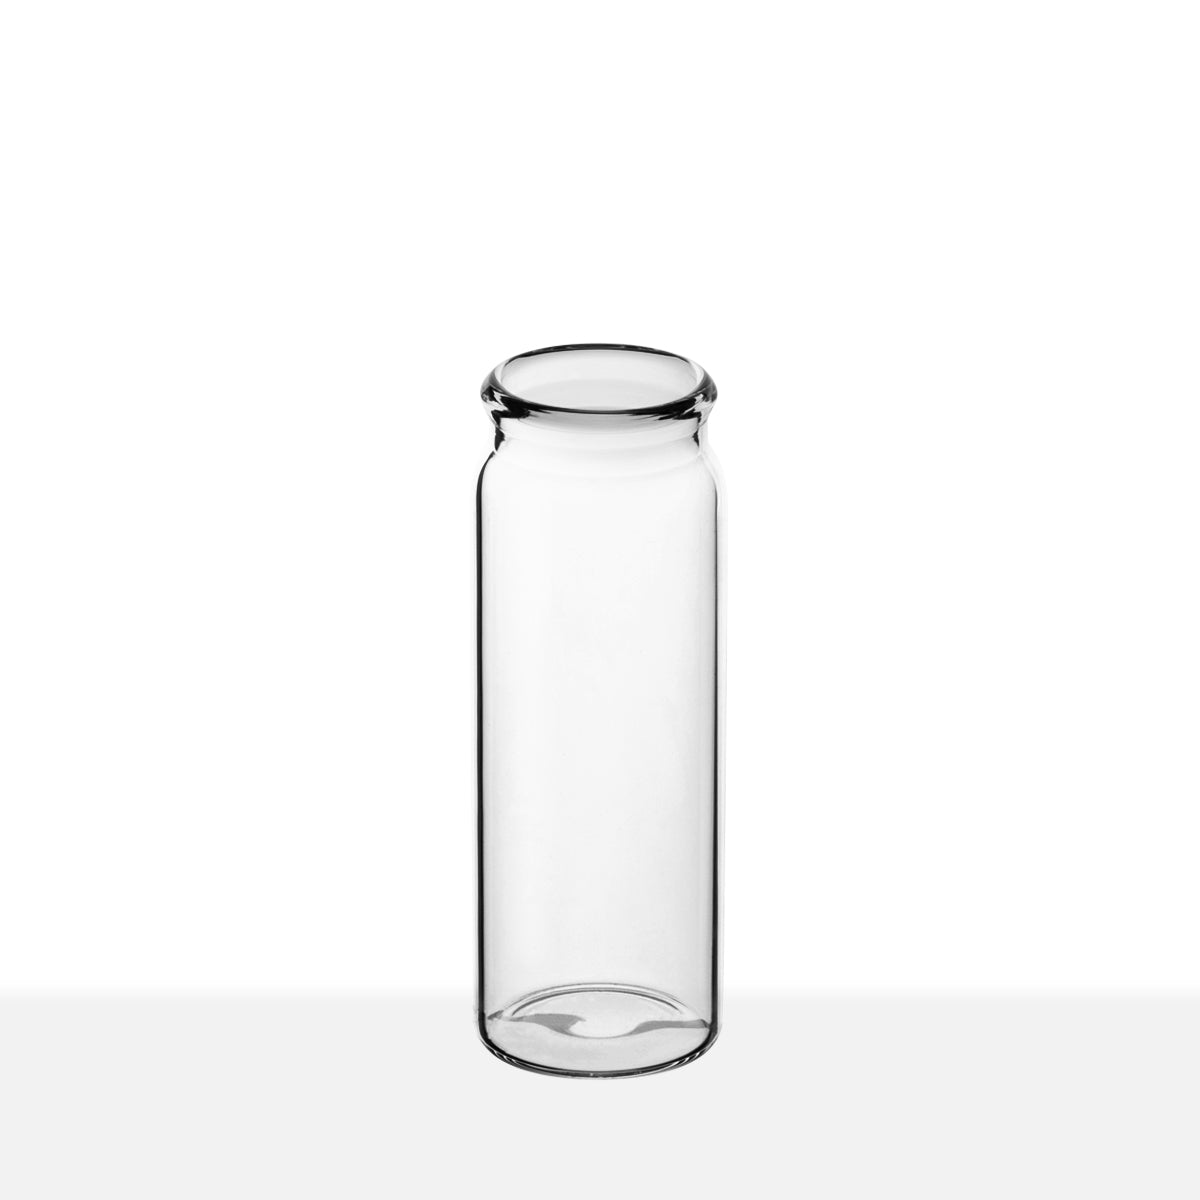 DISPLAY GLASS VIALS - CLEAR Item #:VCPS2980